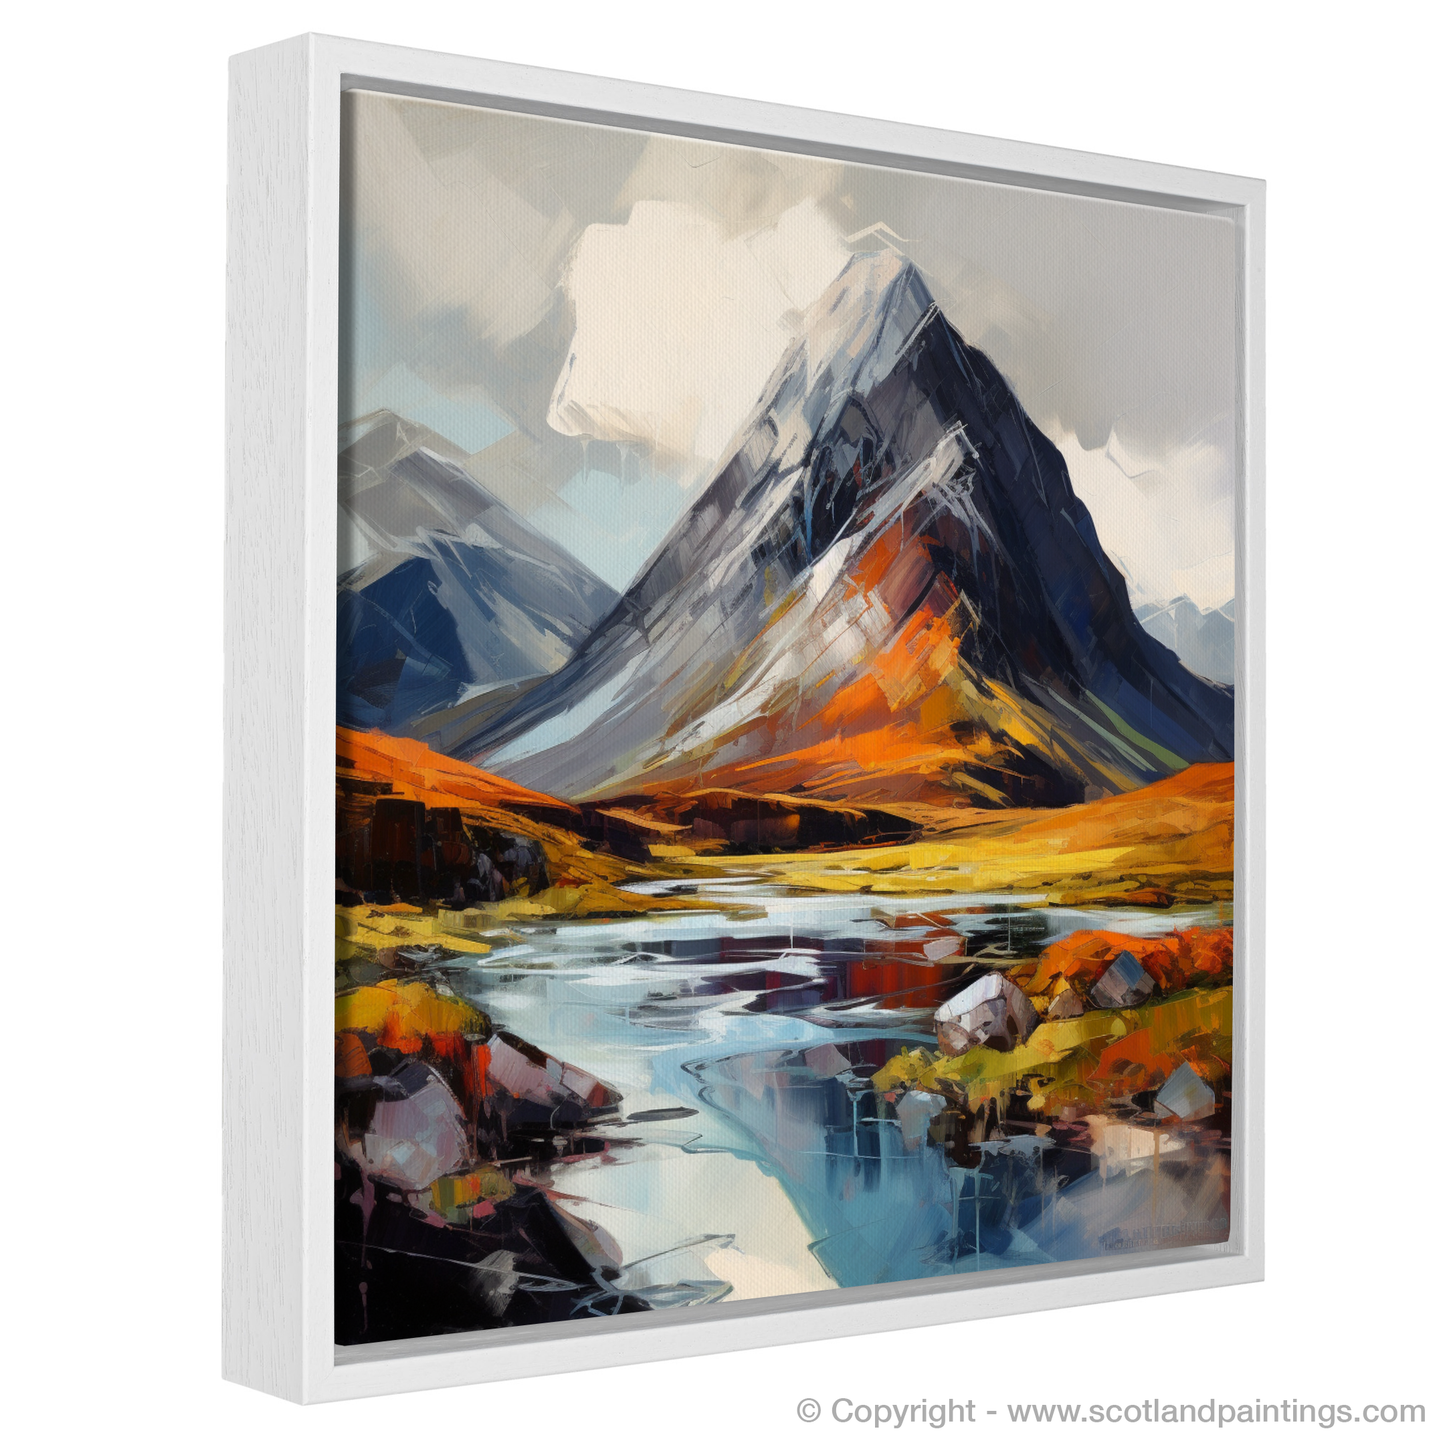 Painting and Art Print of Stob Coire Raineach (Buachaille Etive Beag) entitled "Highland Majesty: An Expressionist Ode to Stob Coire Raineach".